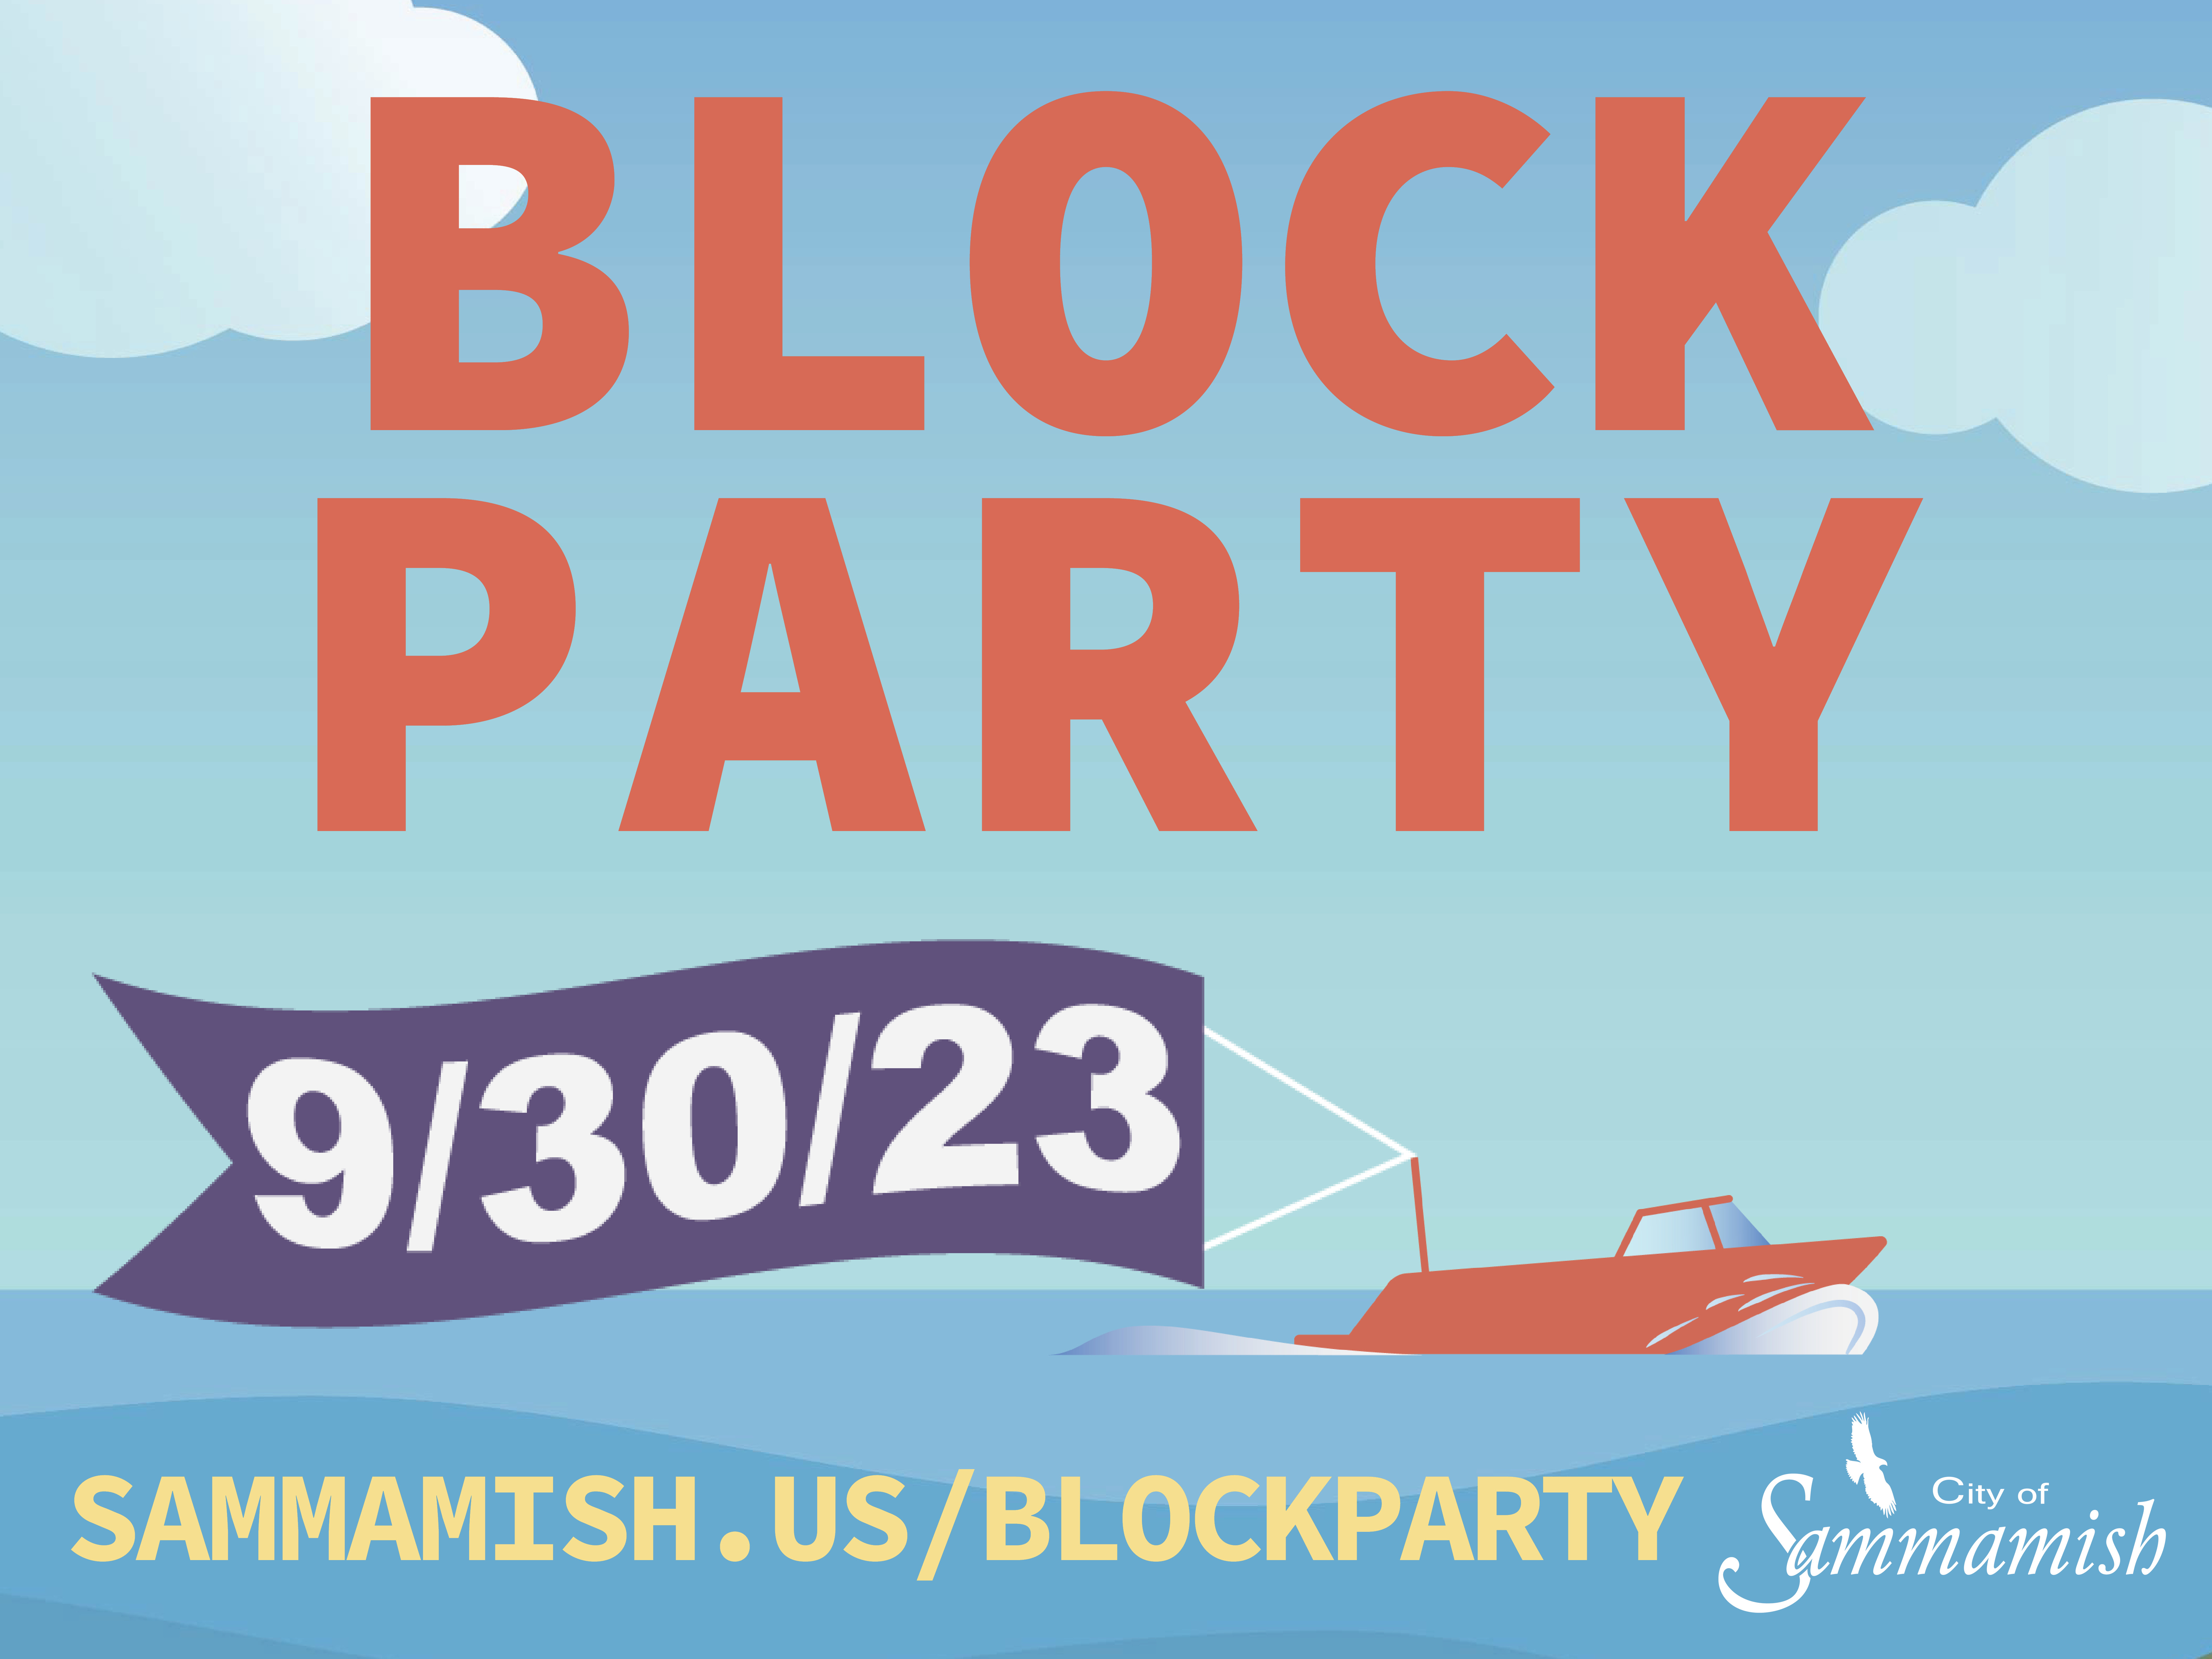 Shout® (Review & Giveaway) - Mommy's Block Party